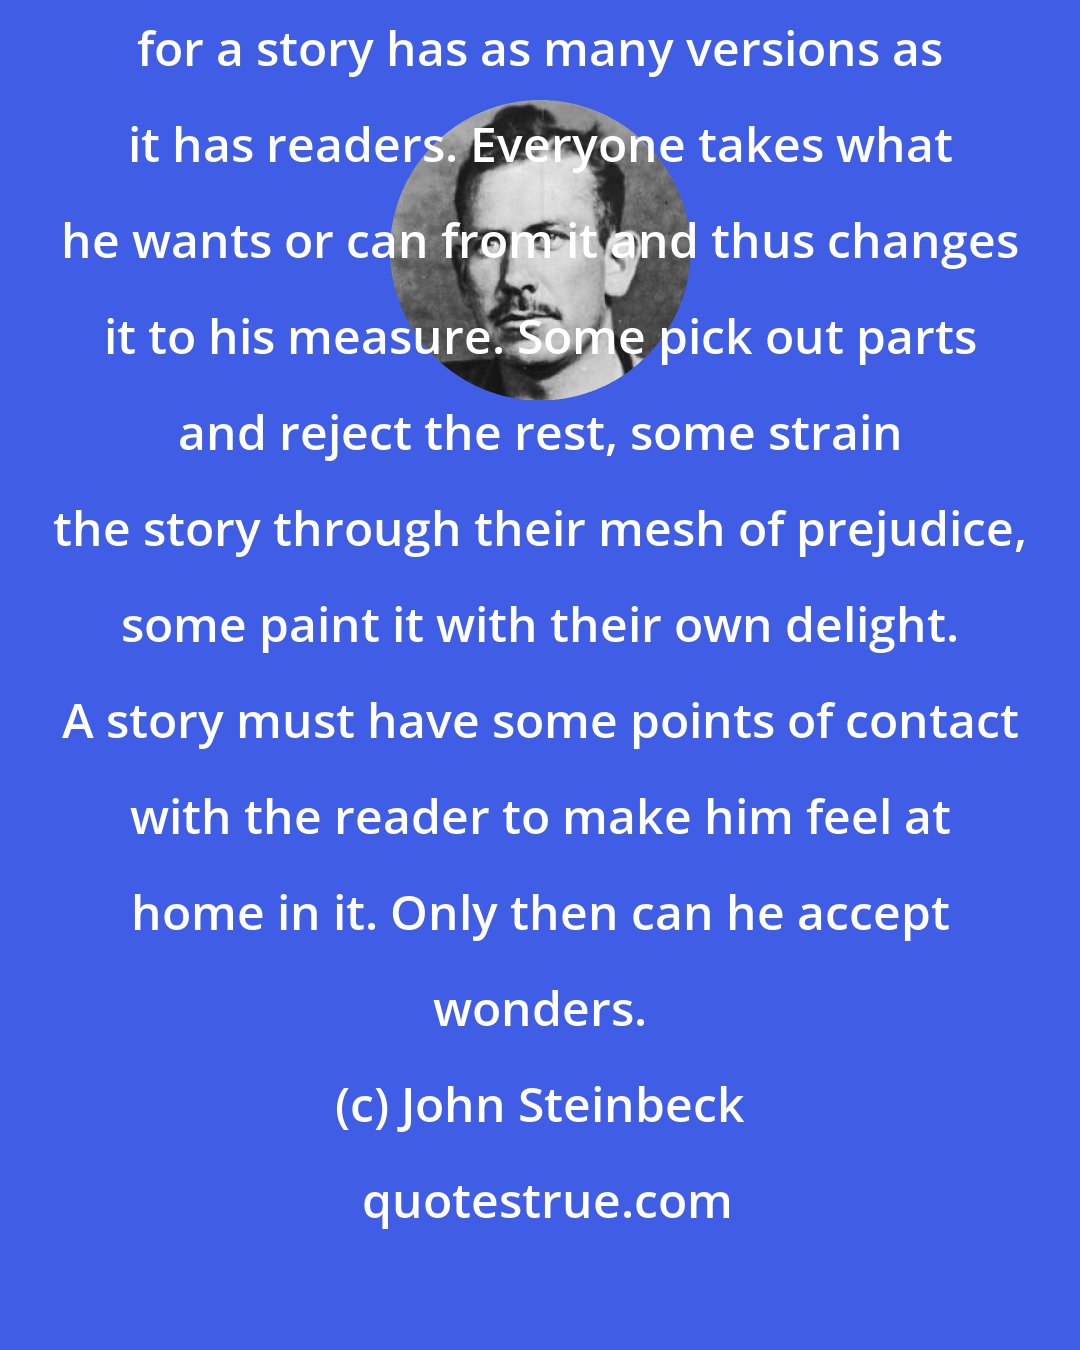 John Steinbeck: A man who tells secrets or stories must think of who is hearing or reading, for a story has as many versions as it has readers. Everyone takes what he wants or can from it and thus changes it to his measure. Some pick out parts and reject the rest, some strain the story through their mesh of prejudice, some paint it with their own delight. A story must have some points of contact with the reader to make him feel at home in it. Only then can he accept wonders.